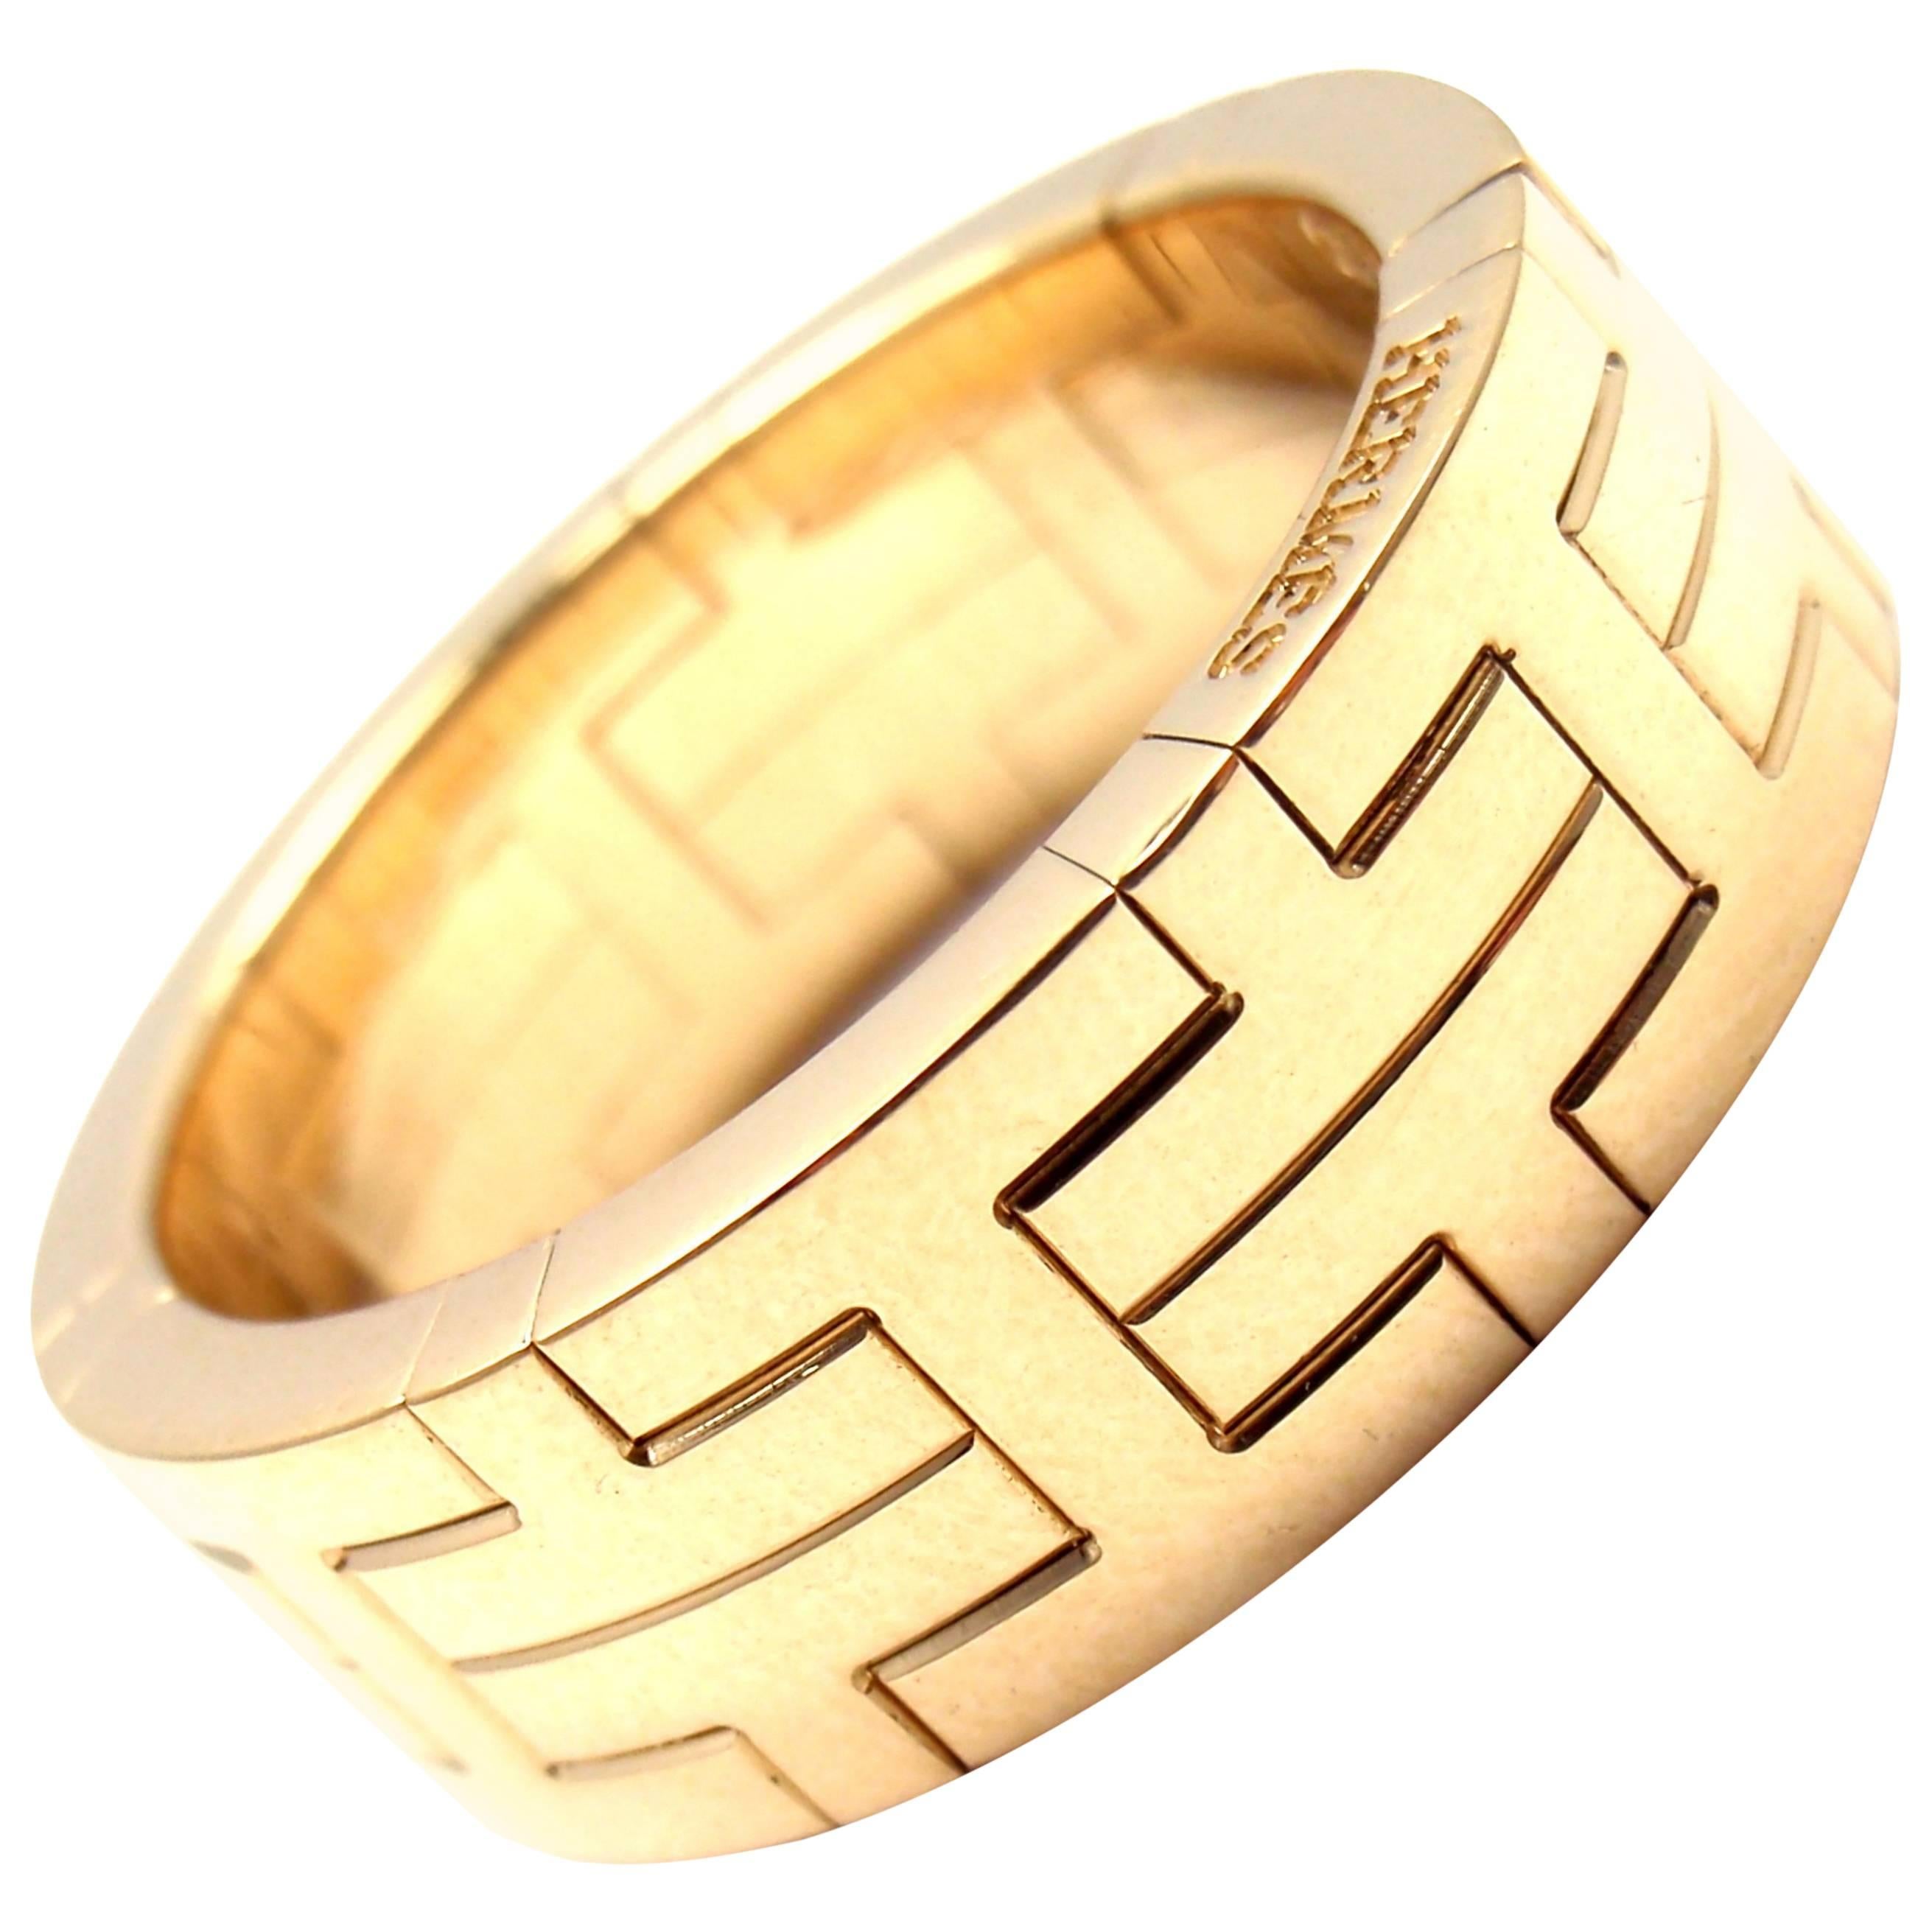 Hermes H Motif Wide Yellow Gold Band Ring